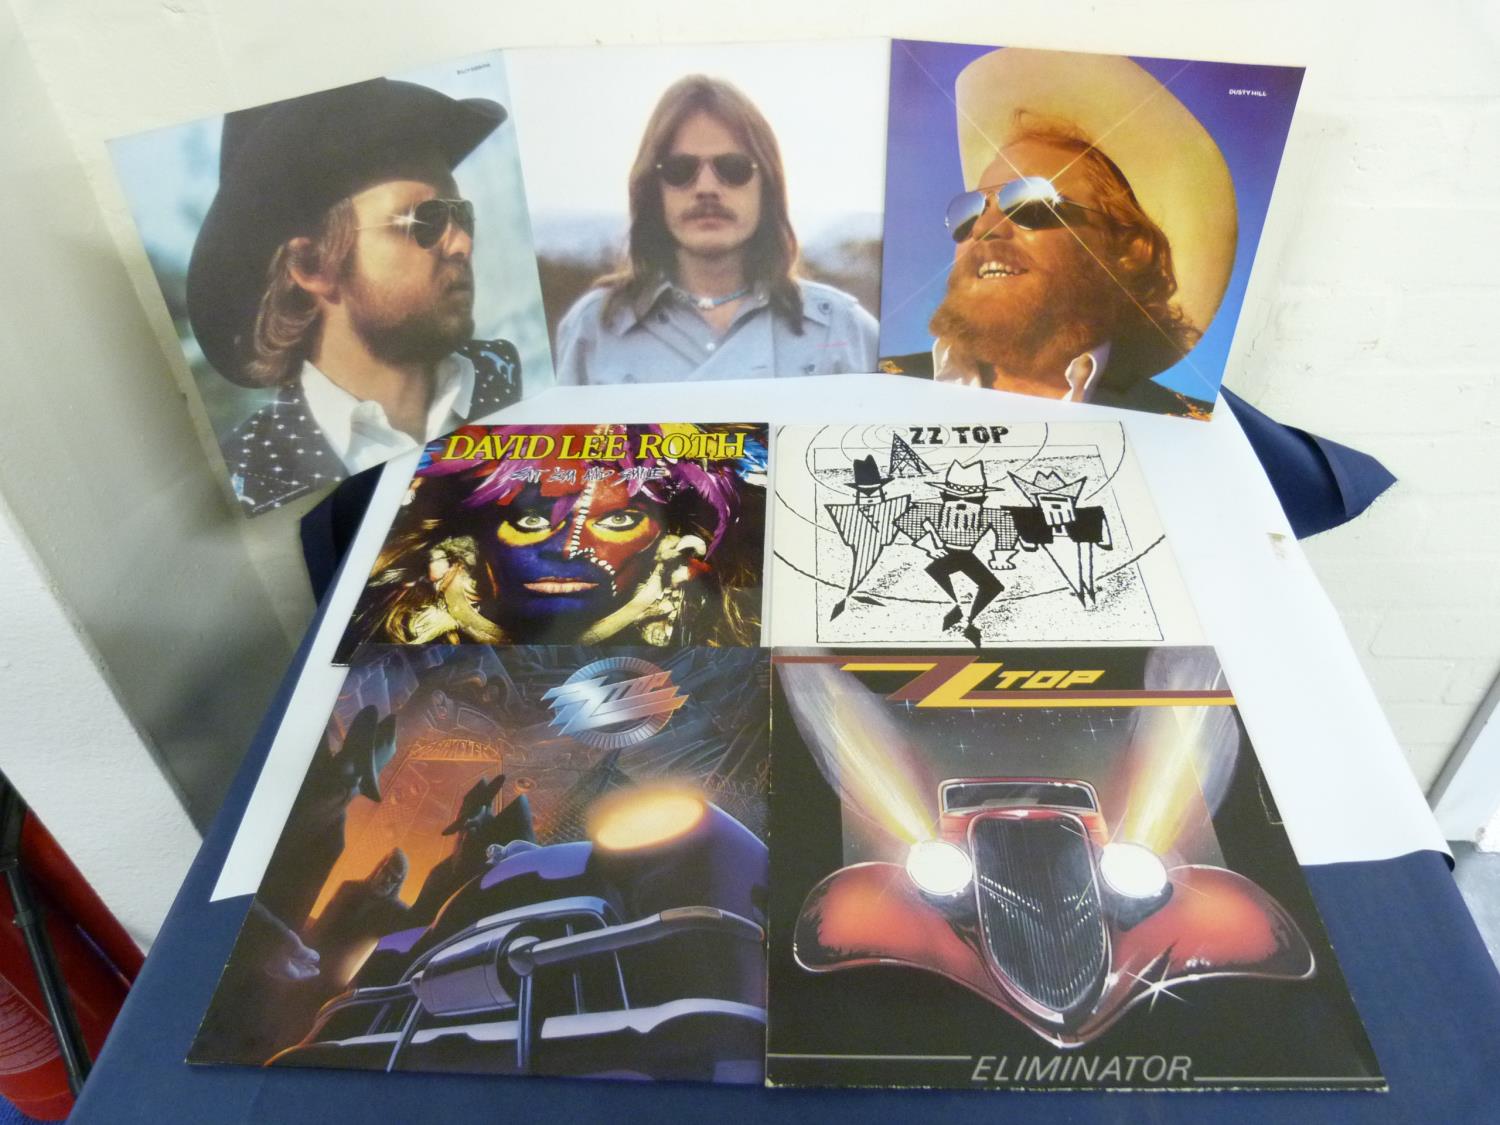 4 x ZZ Top LP's to include Antenna, Eliminator and Tejas plus David Lee Roth. (5) Vinyl mostly EX.